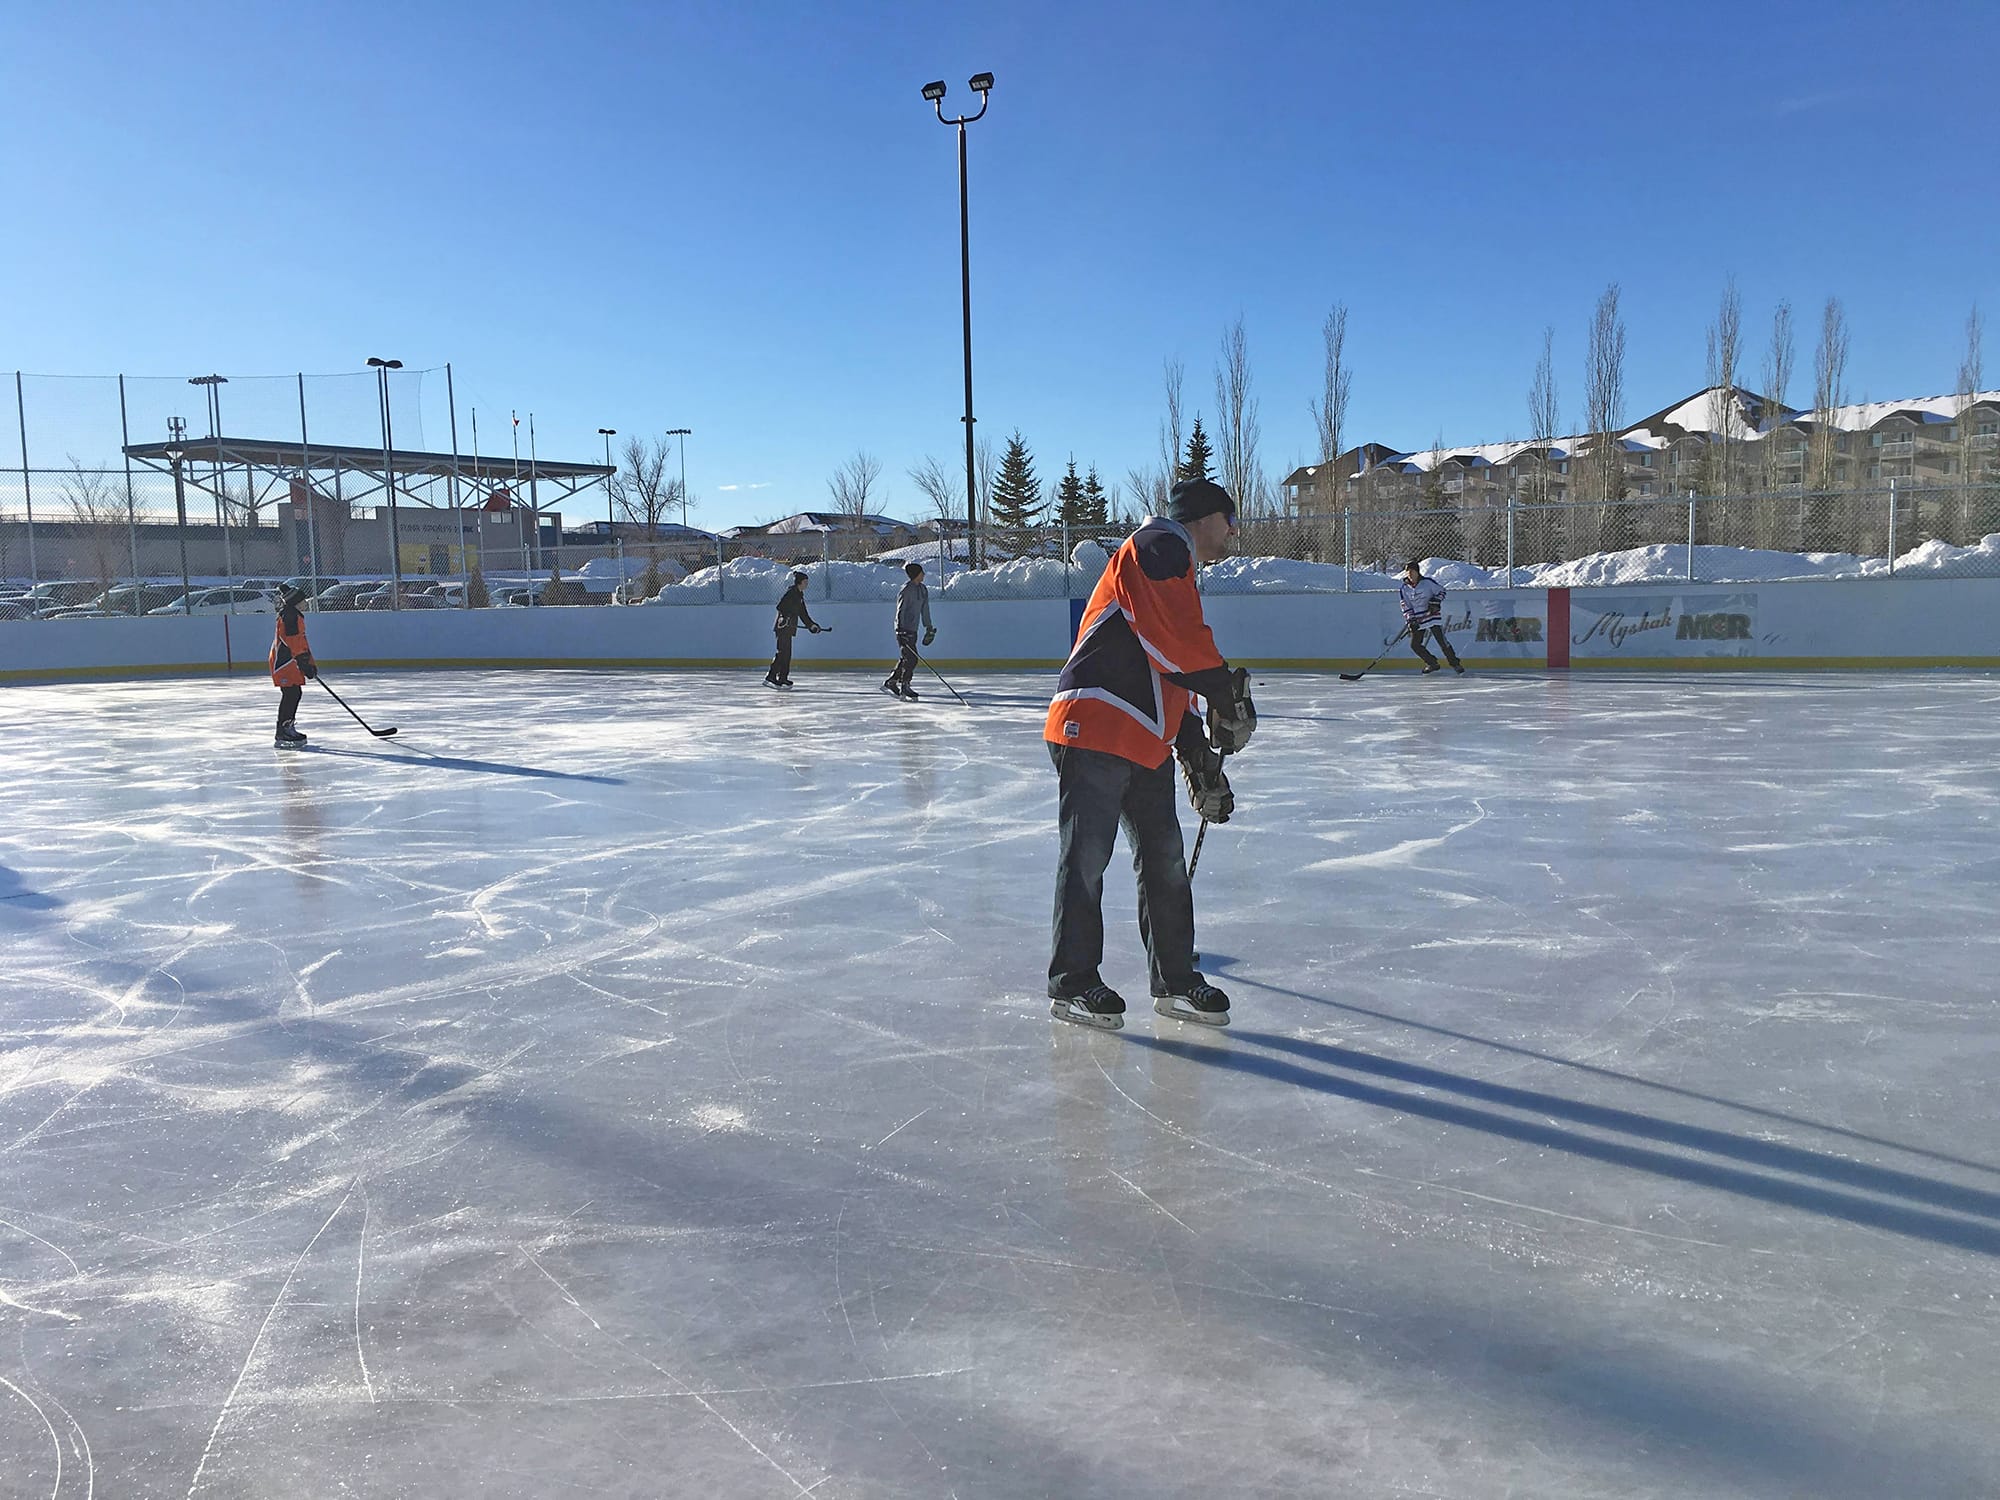 Tri Leisure Centre Outdoor Arena with hockey players